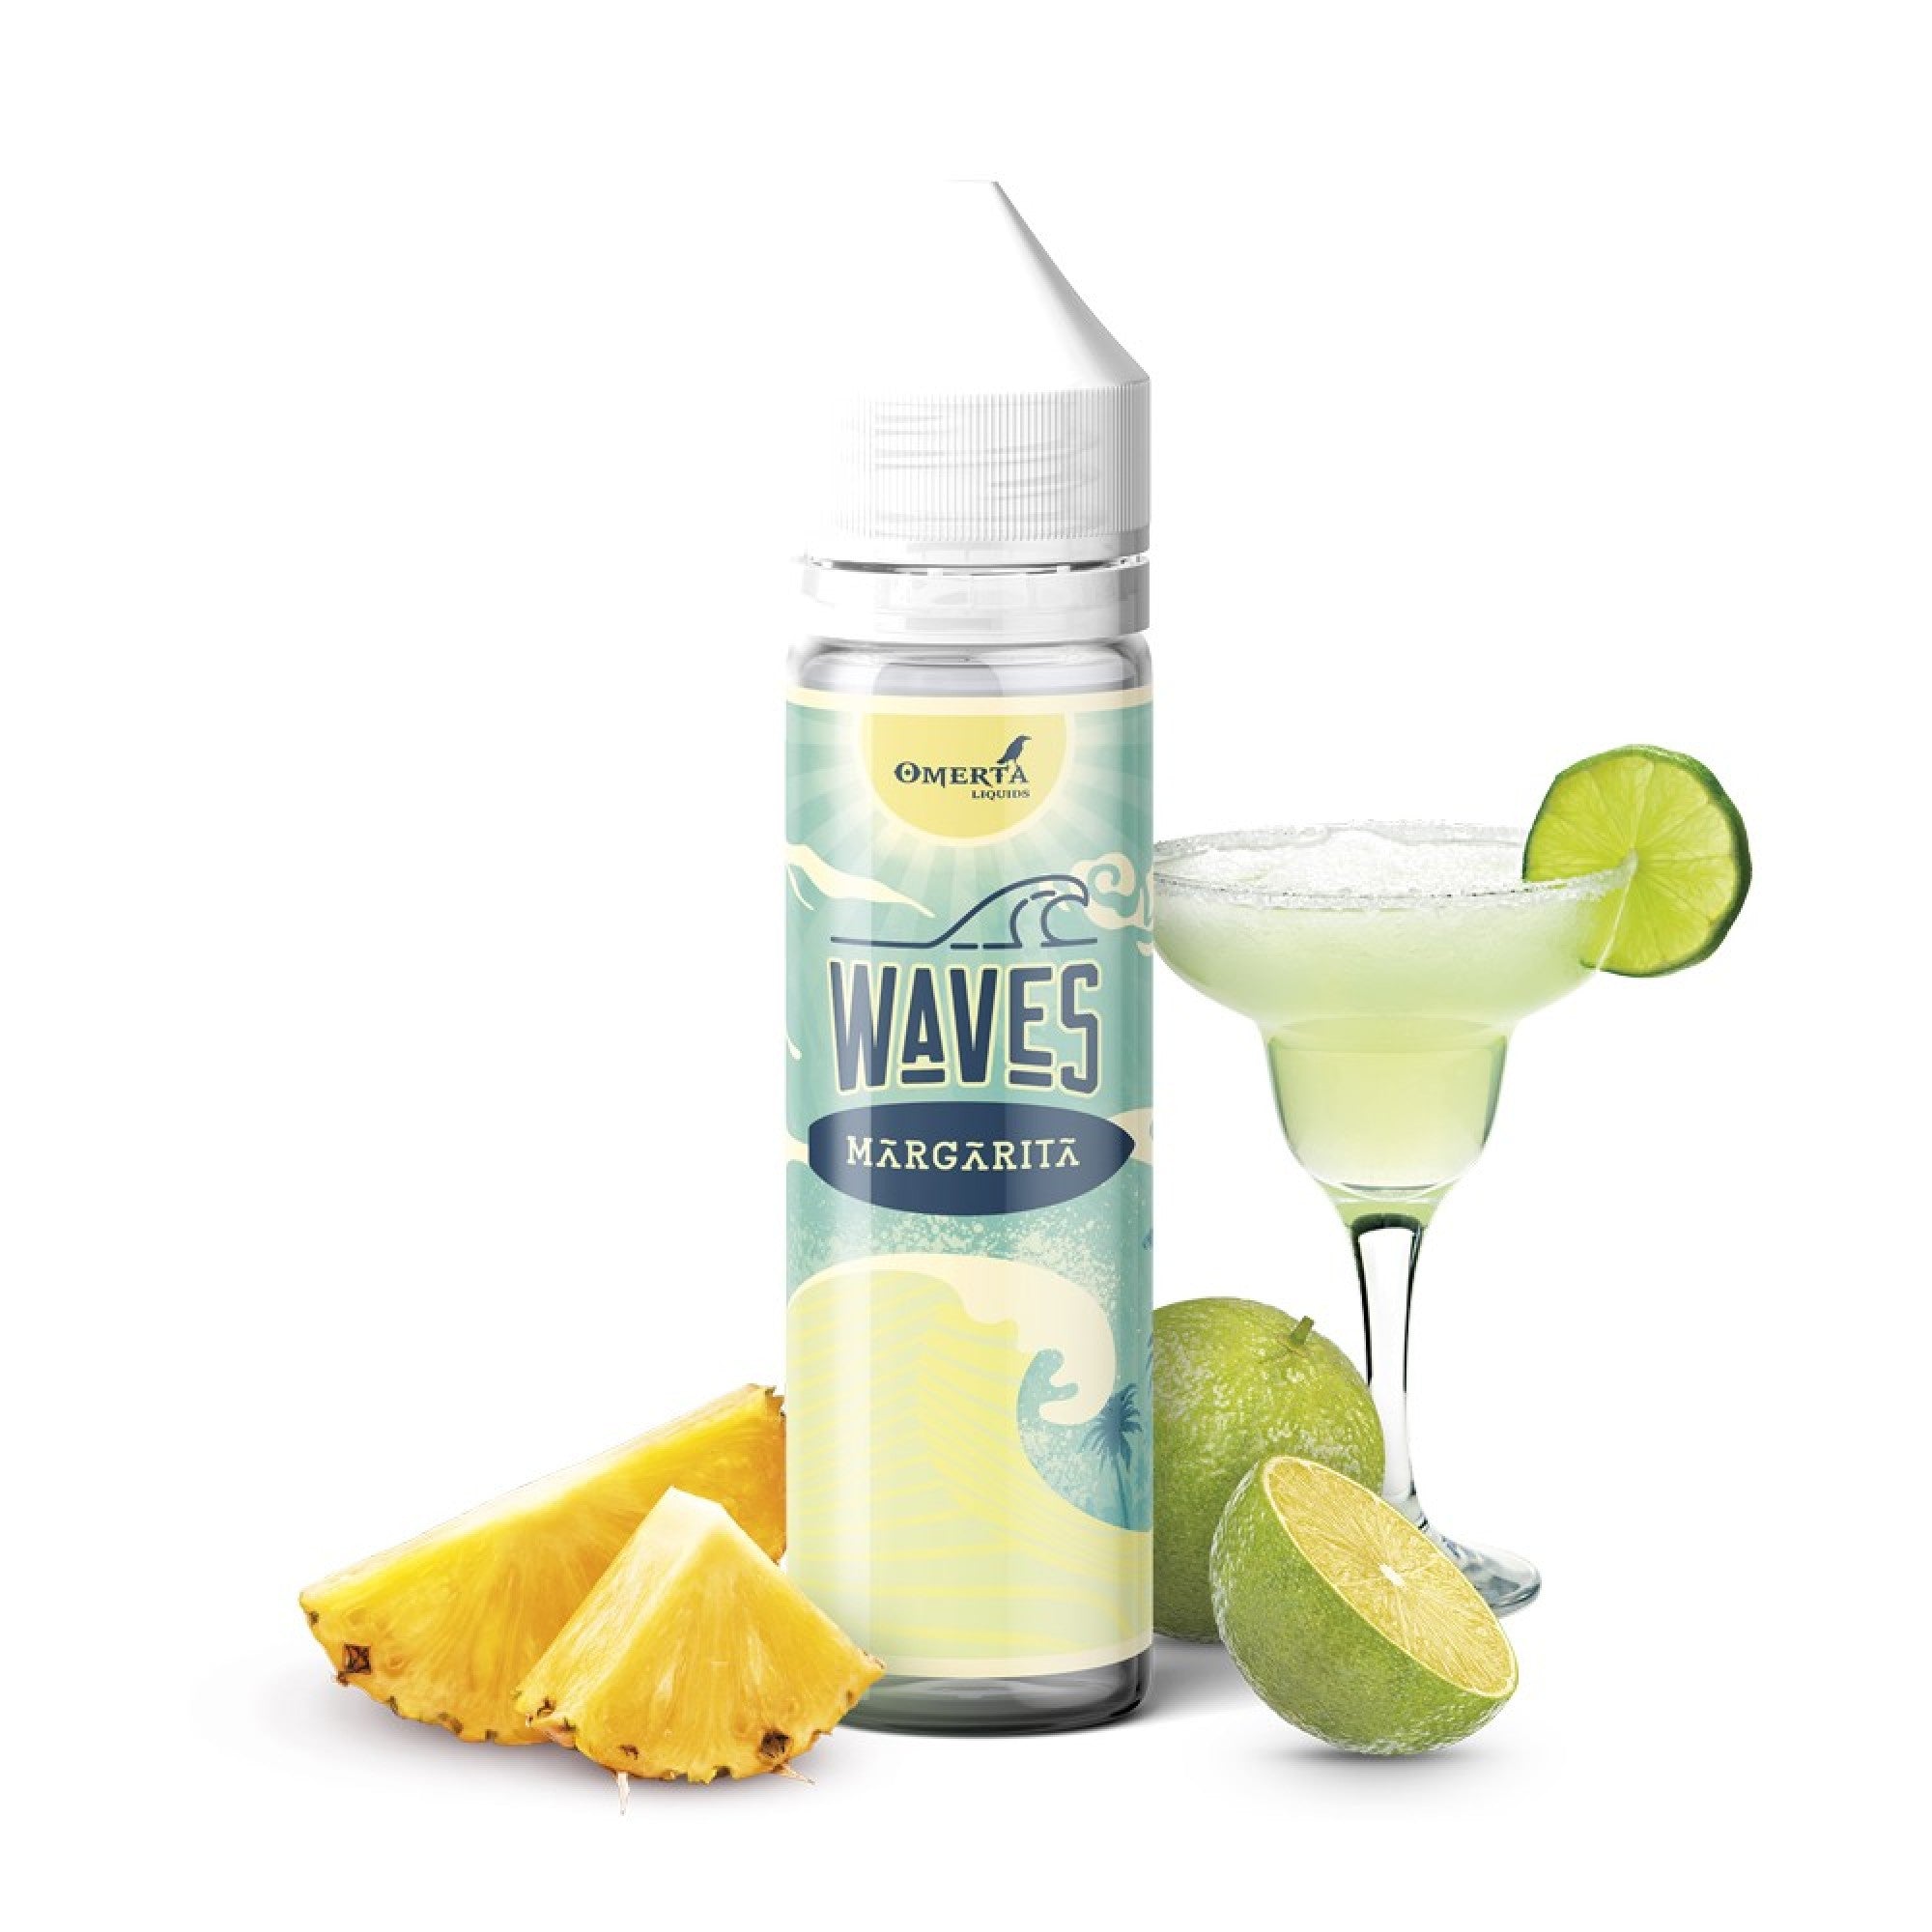 Buy MARGARITA BY WAVES - Wick And Wire Co Melbourne Vape Shop, Victoria Australia